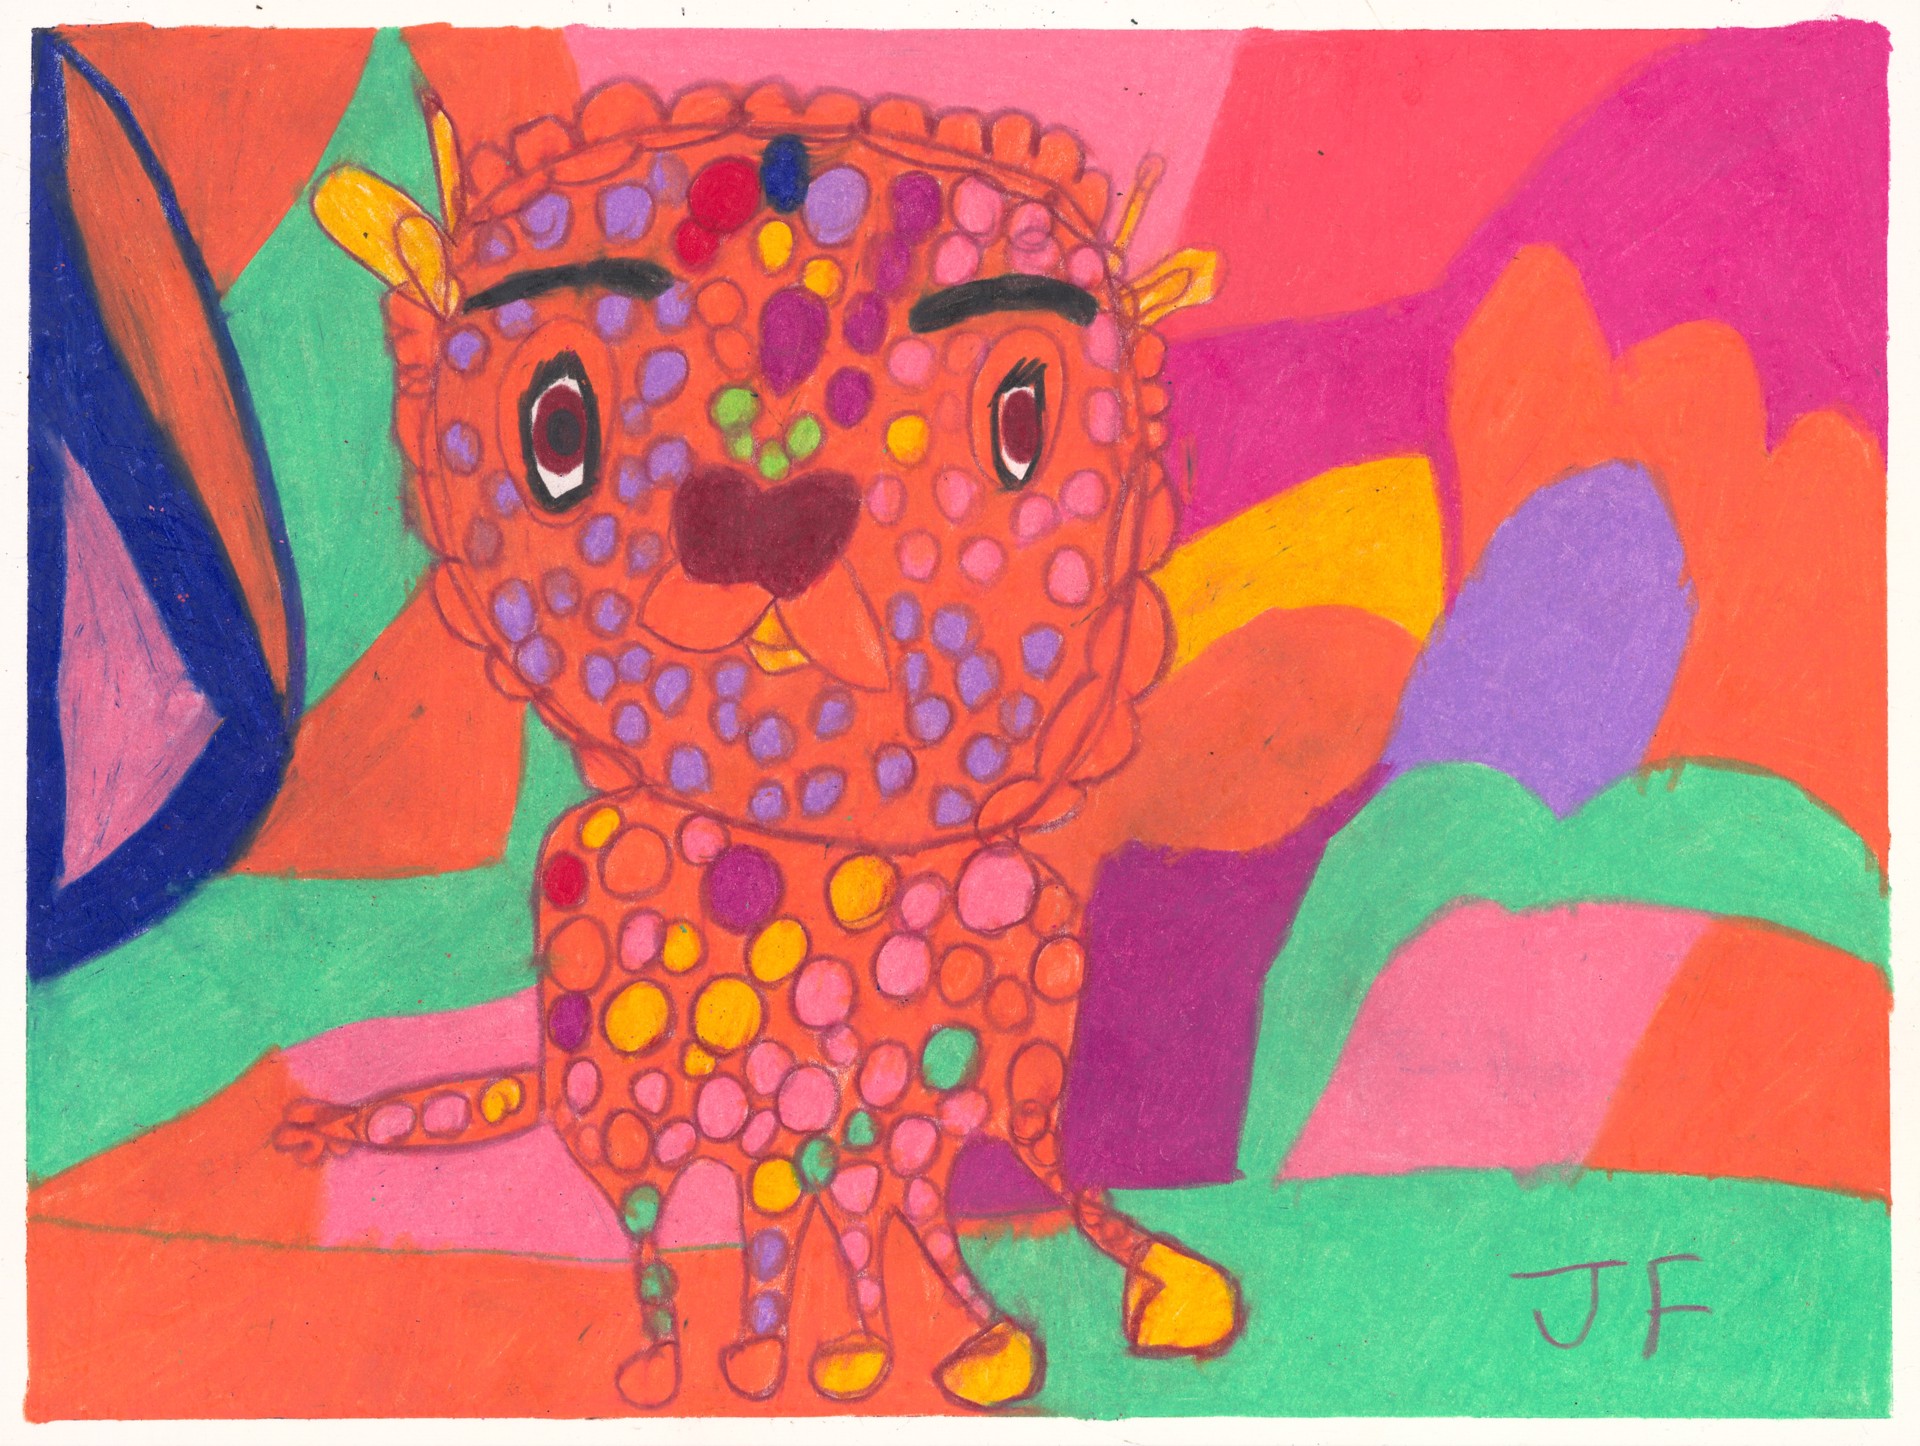 The Dotted Animal by Josephine Finnell